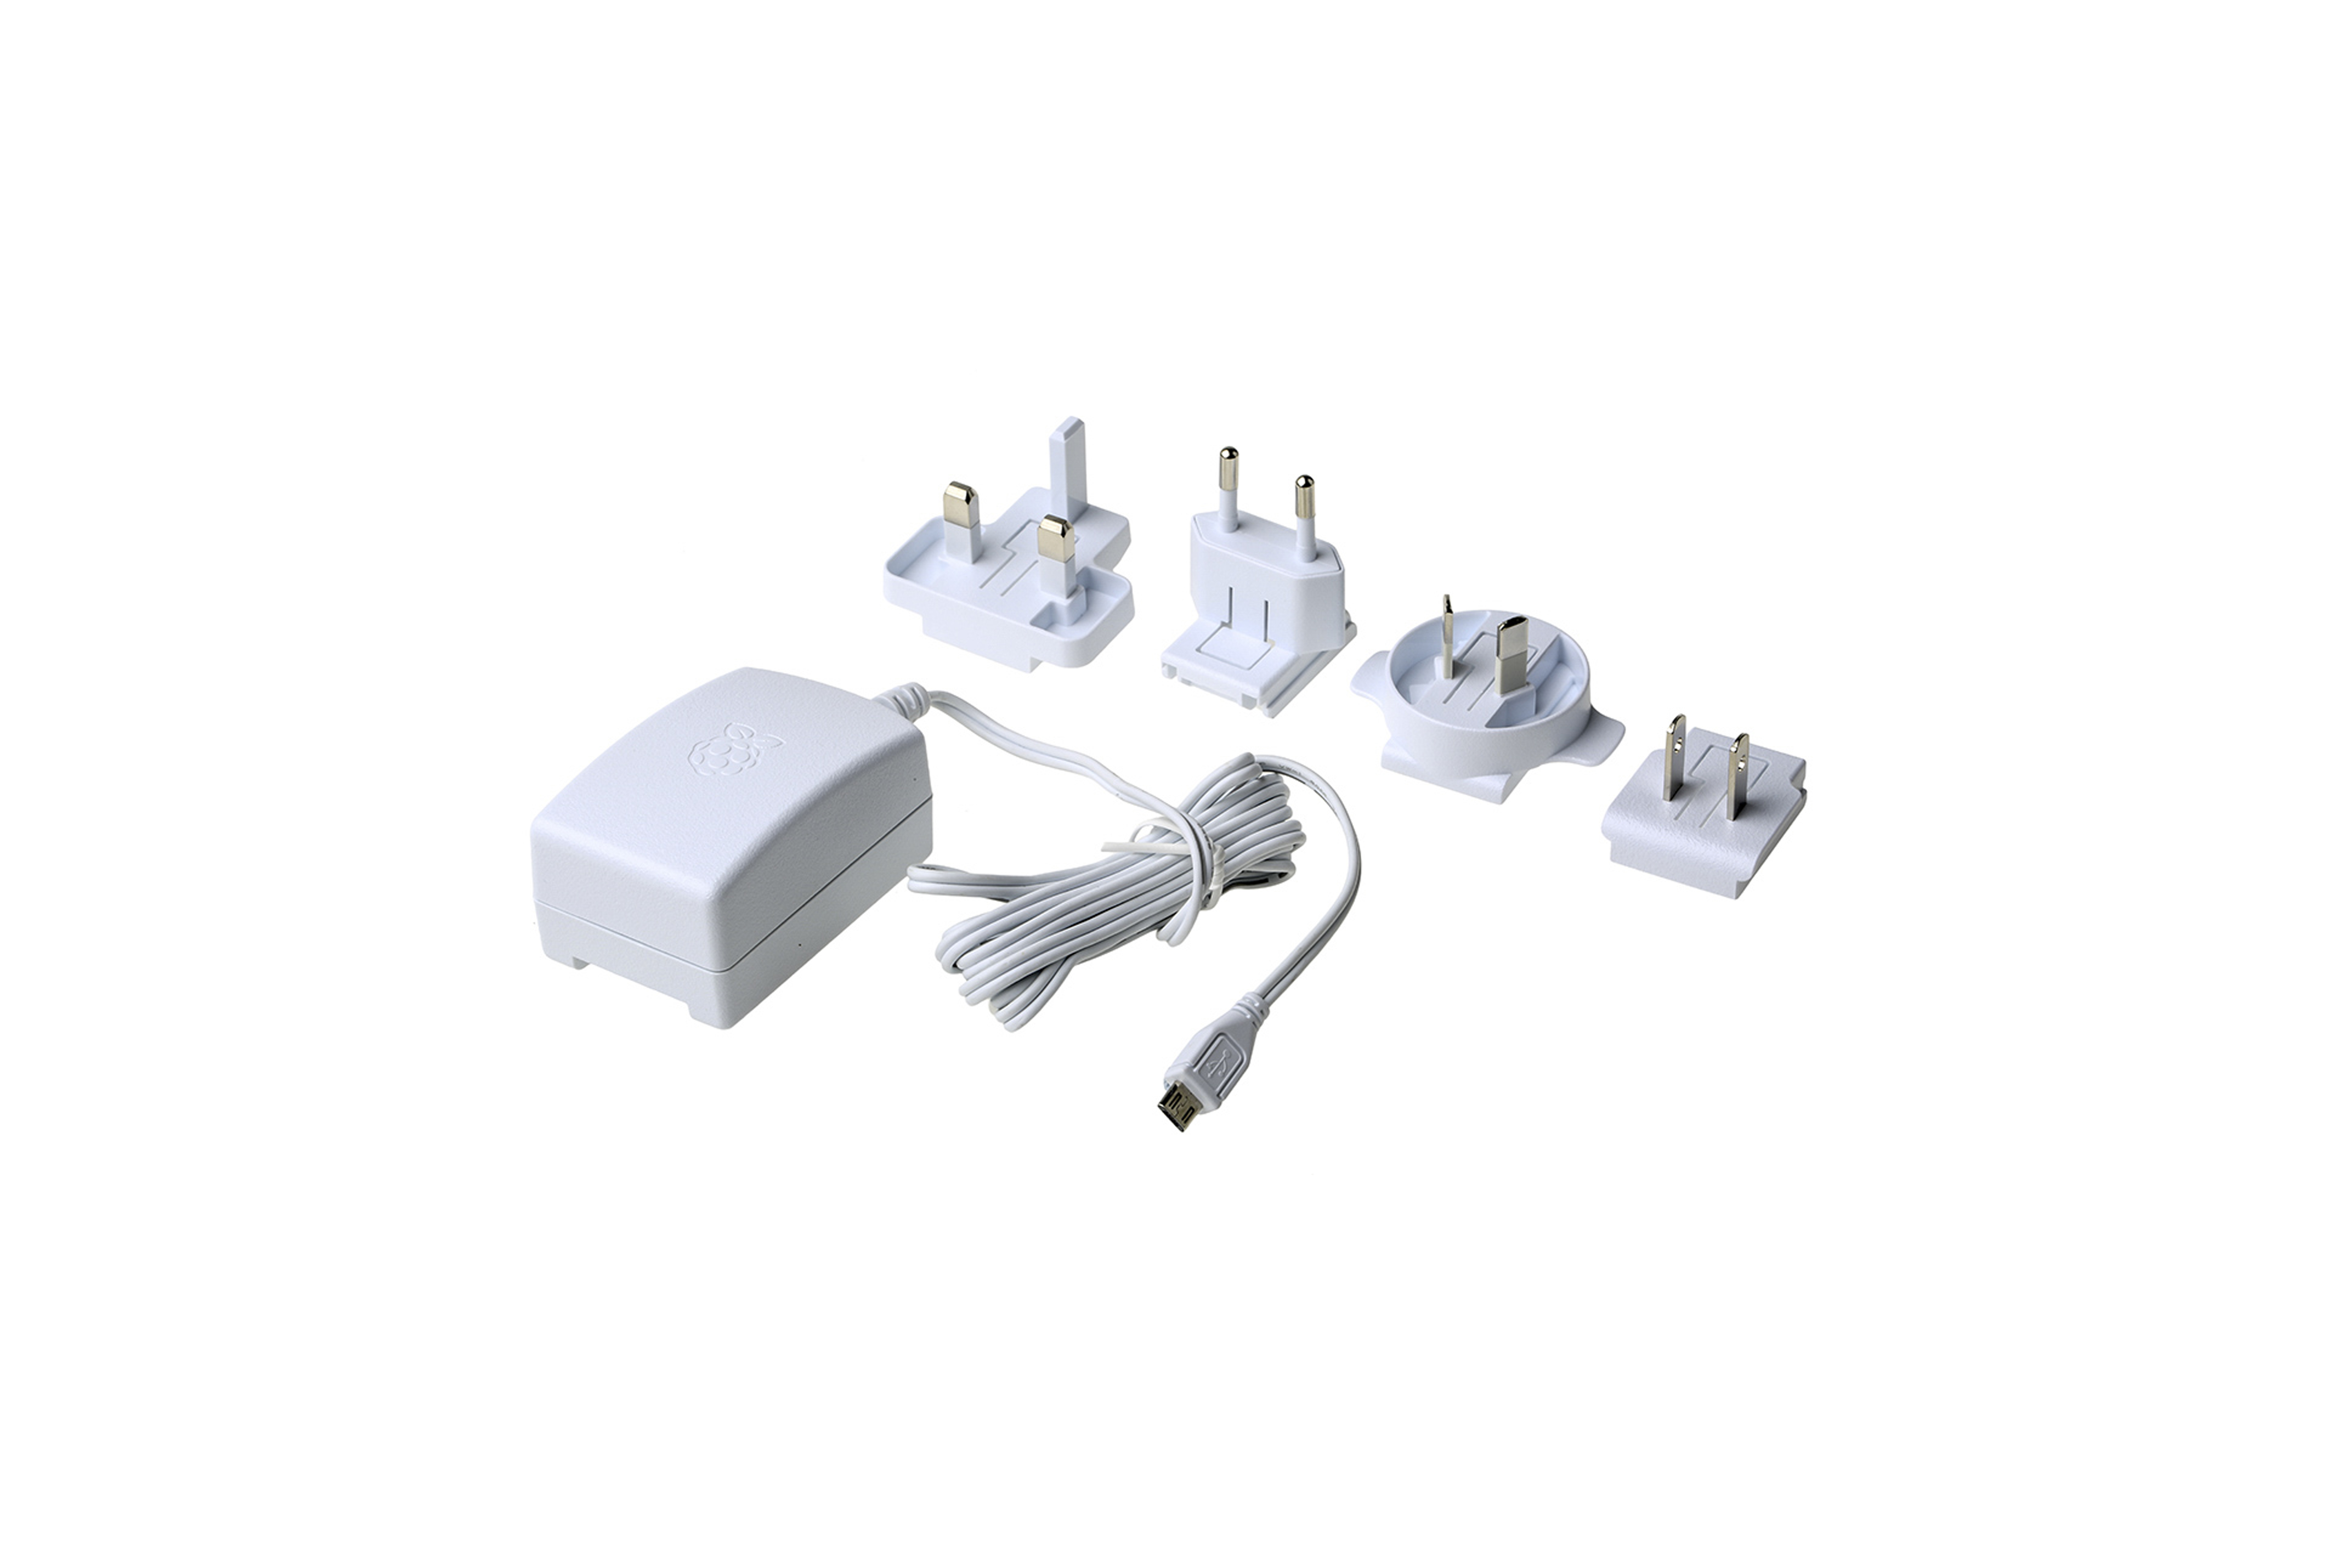 Official Raspberry Pi 3 Universal Power Supply White